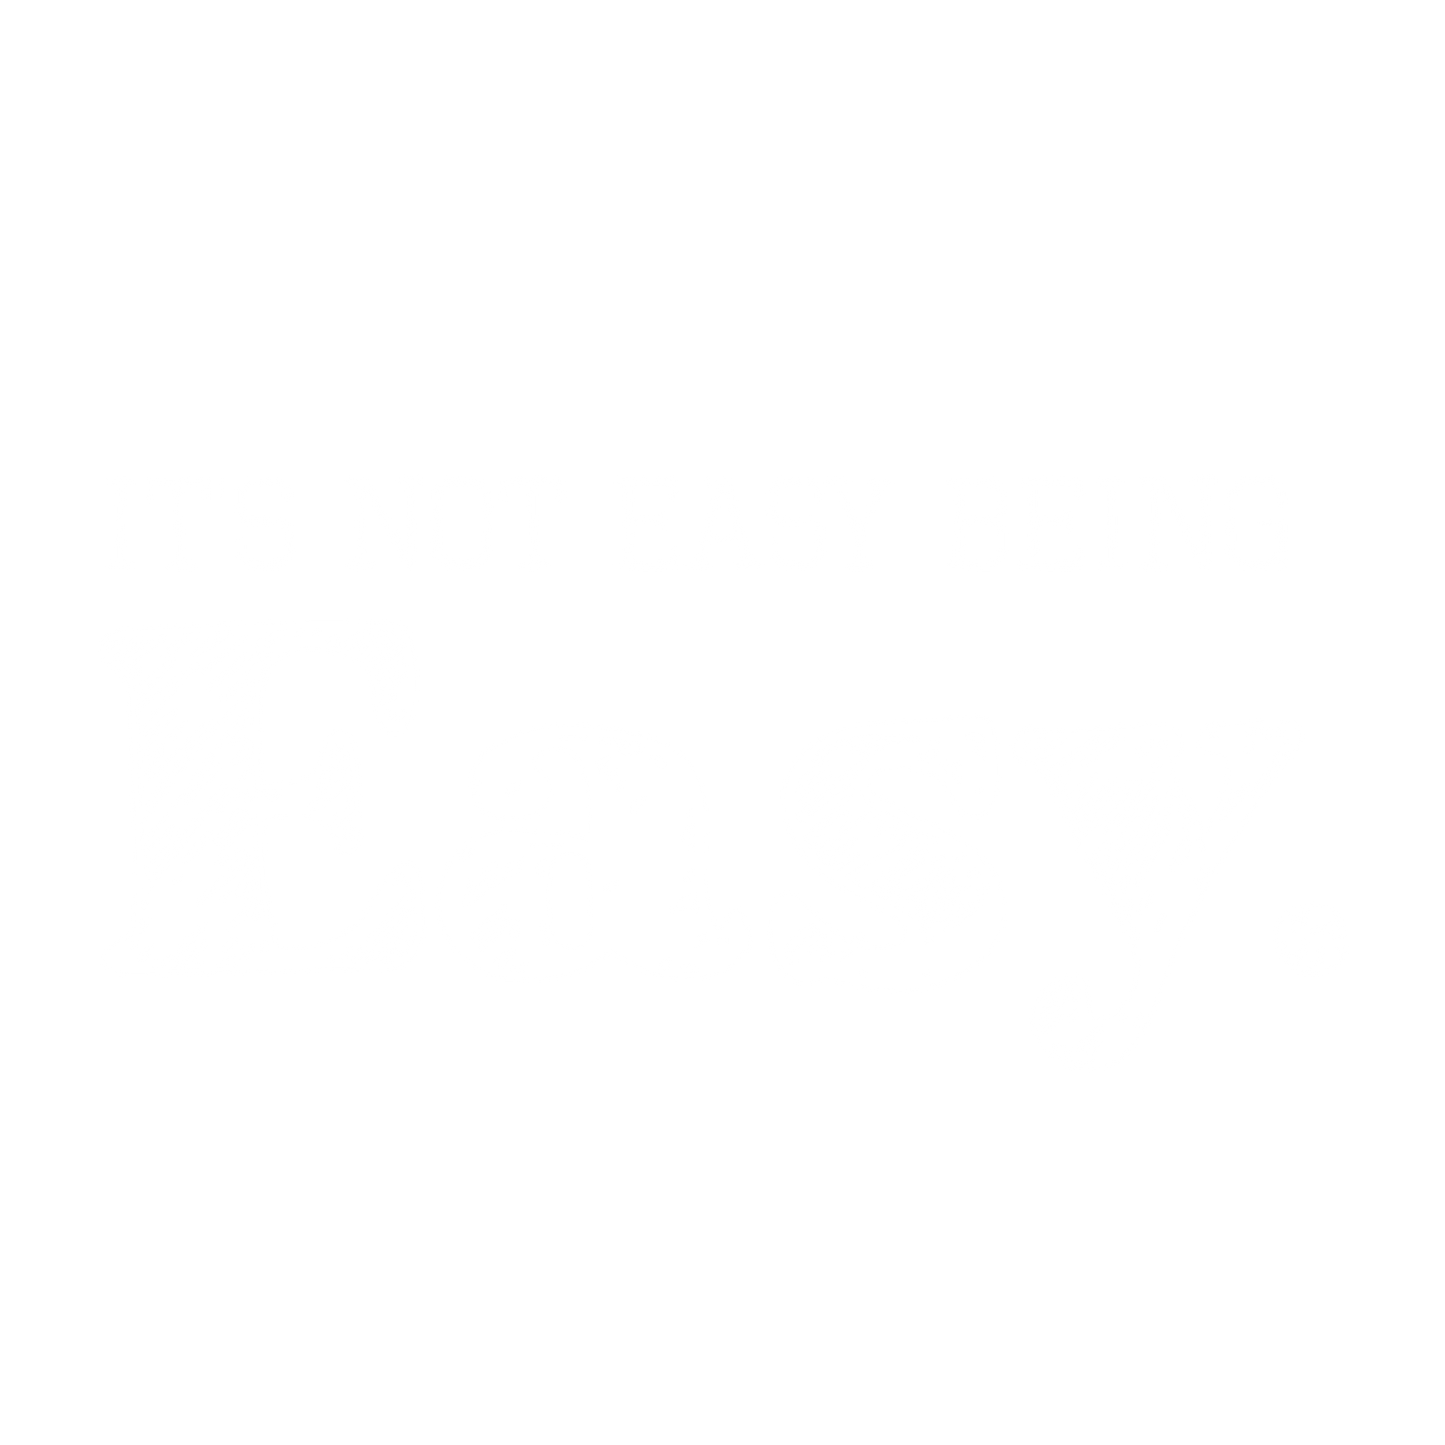 It's Not Easy Being Easy.